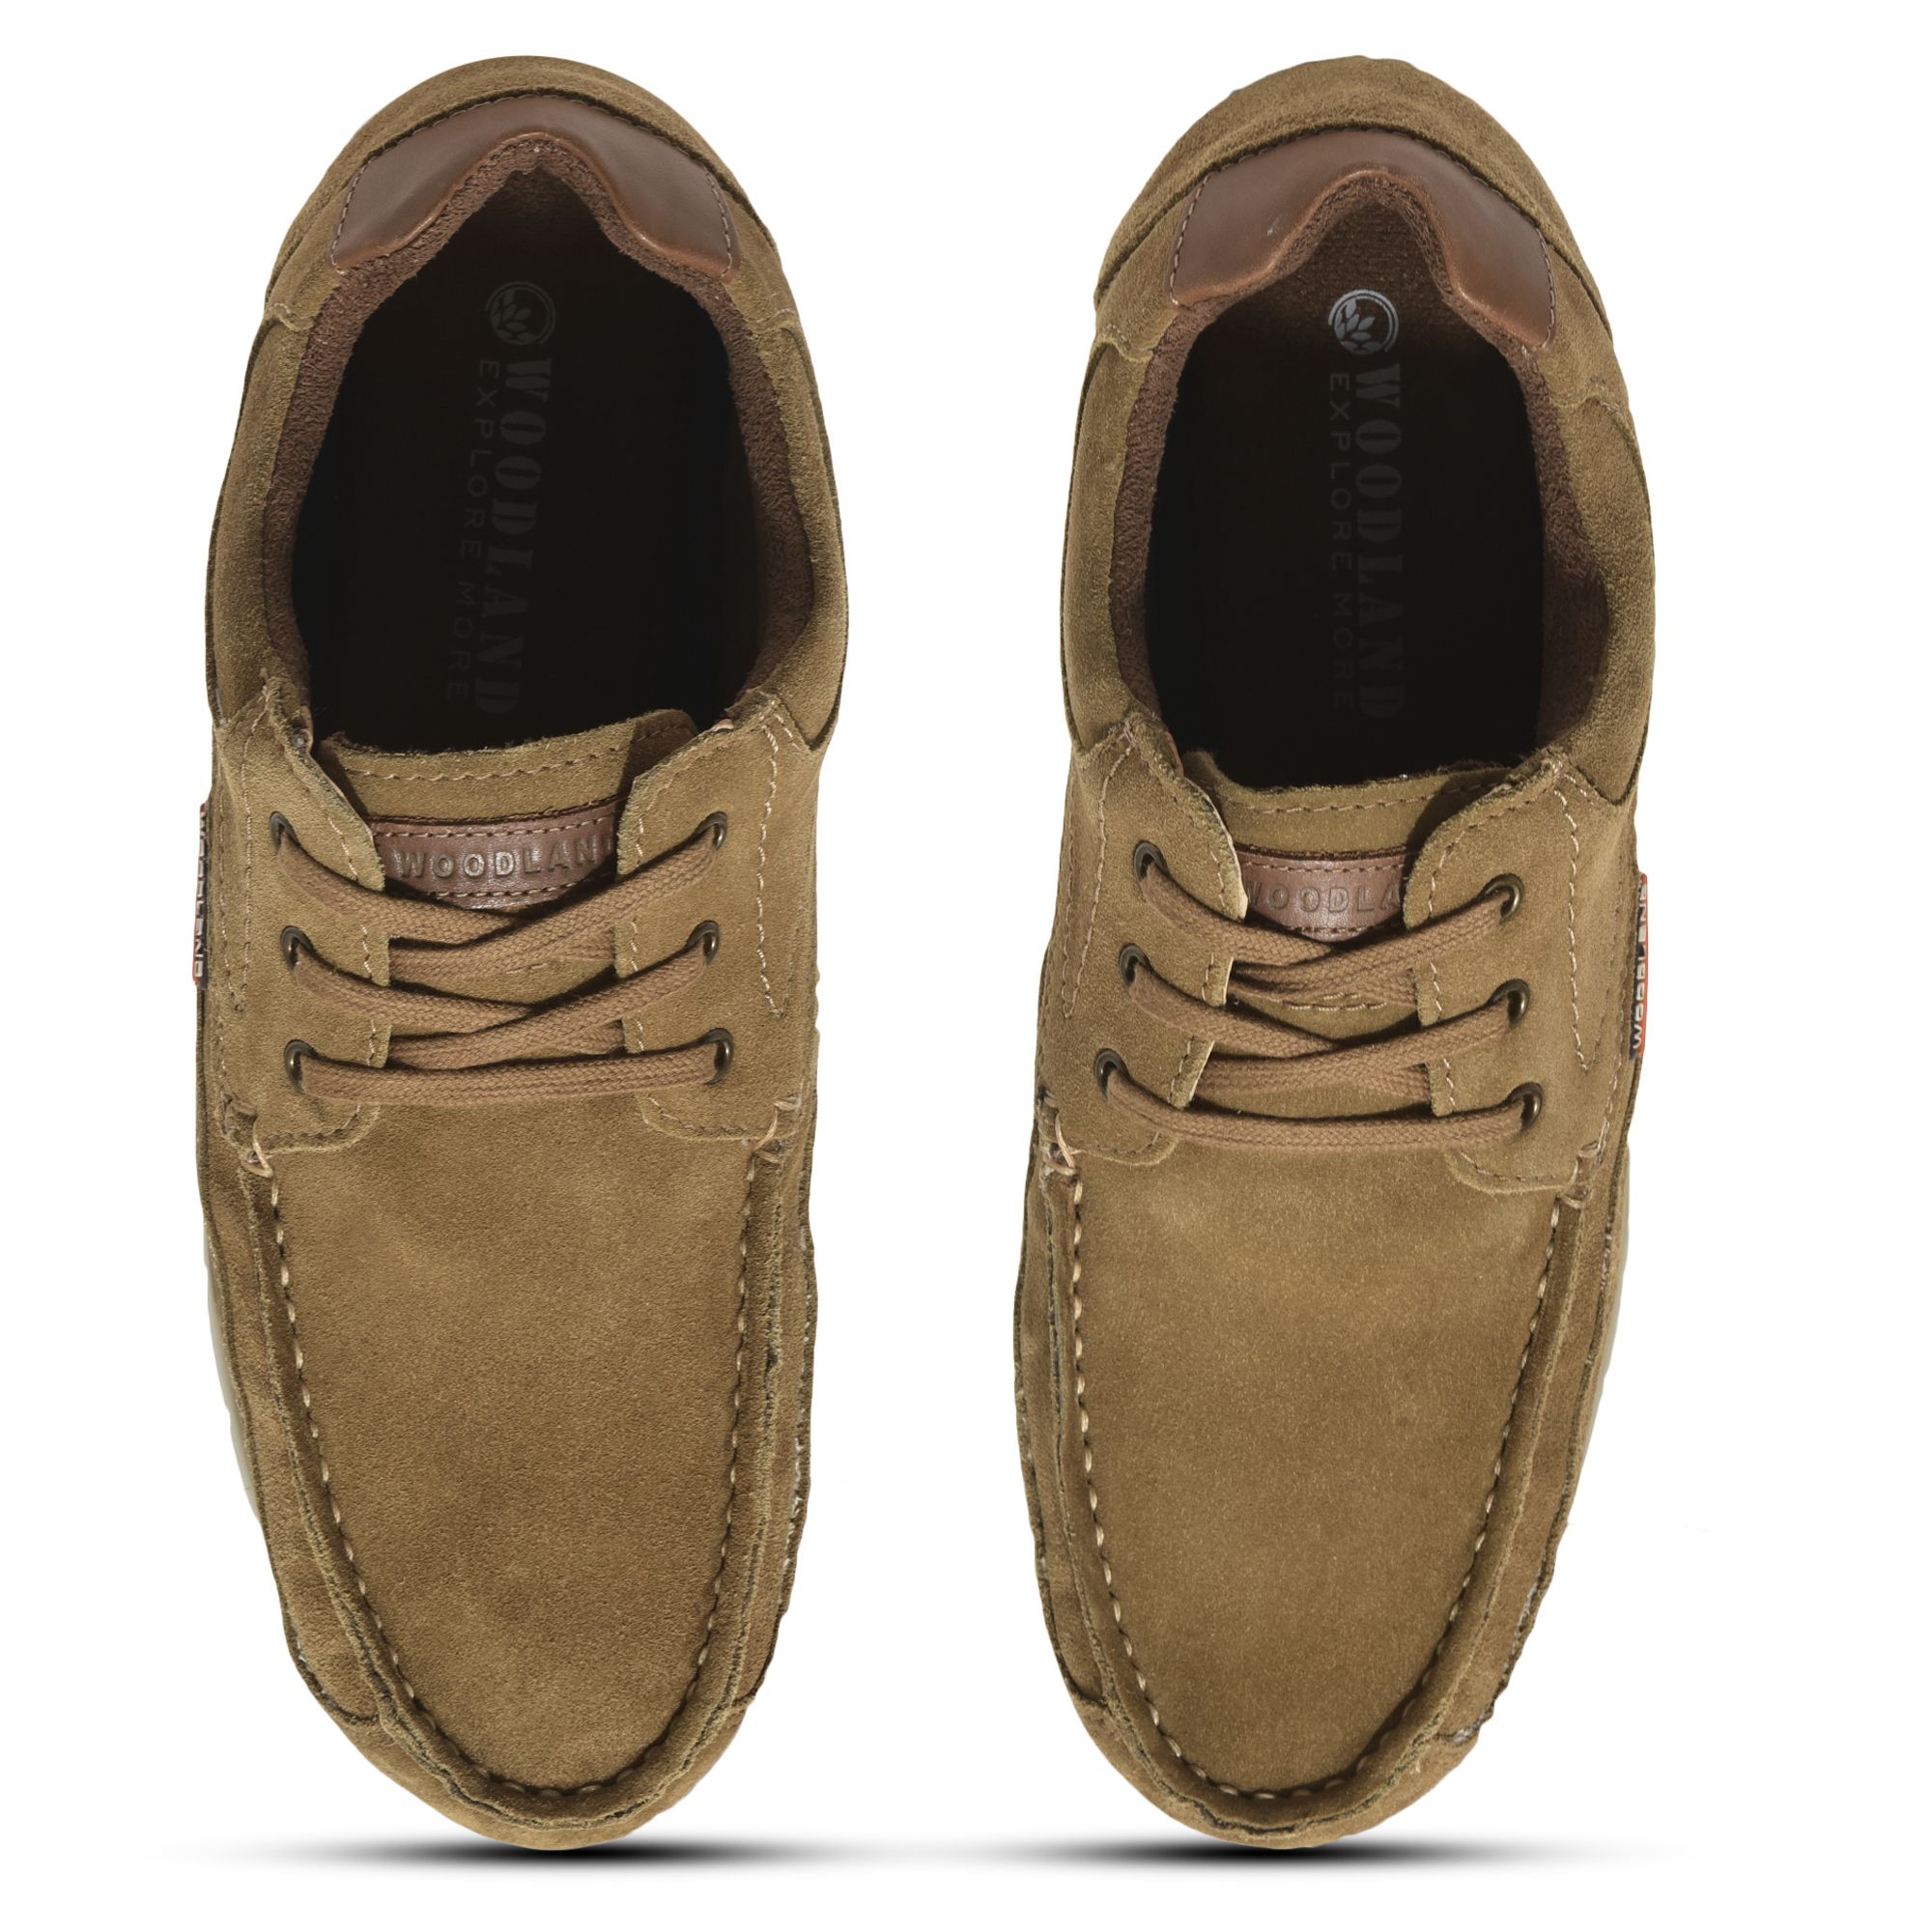 Camel casual shoes for men